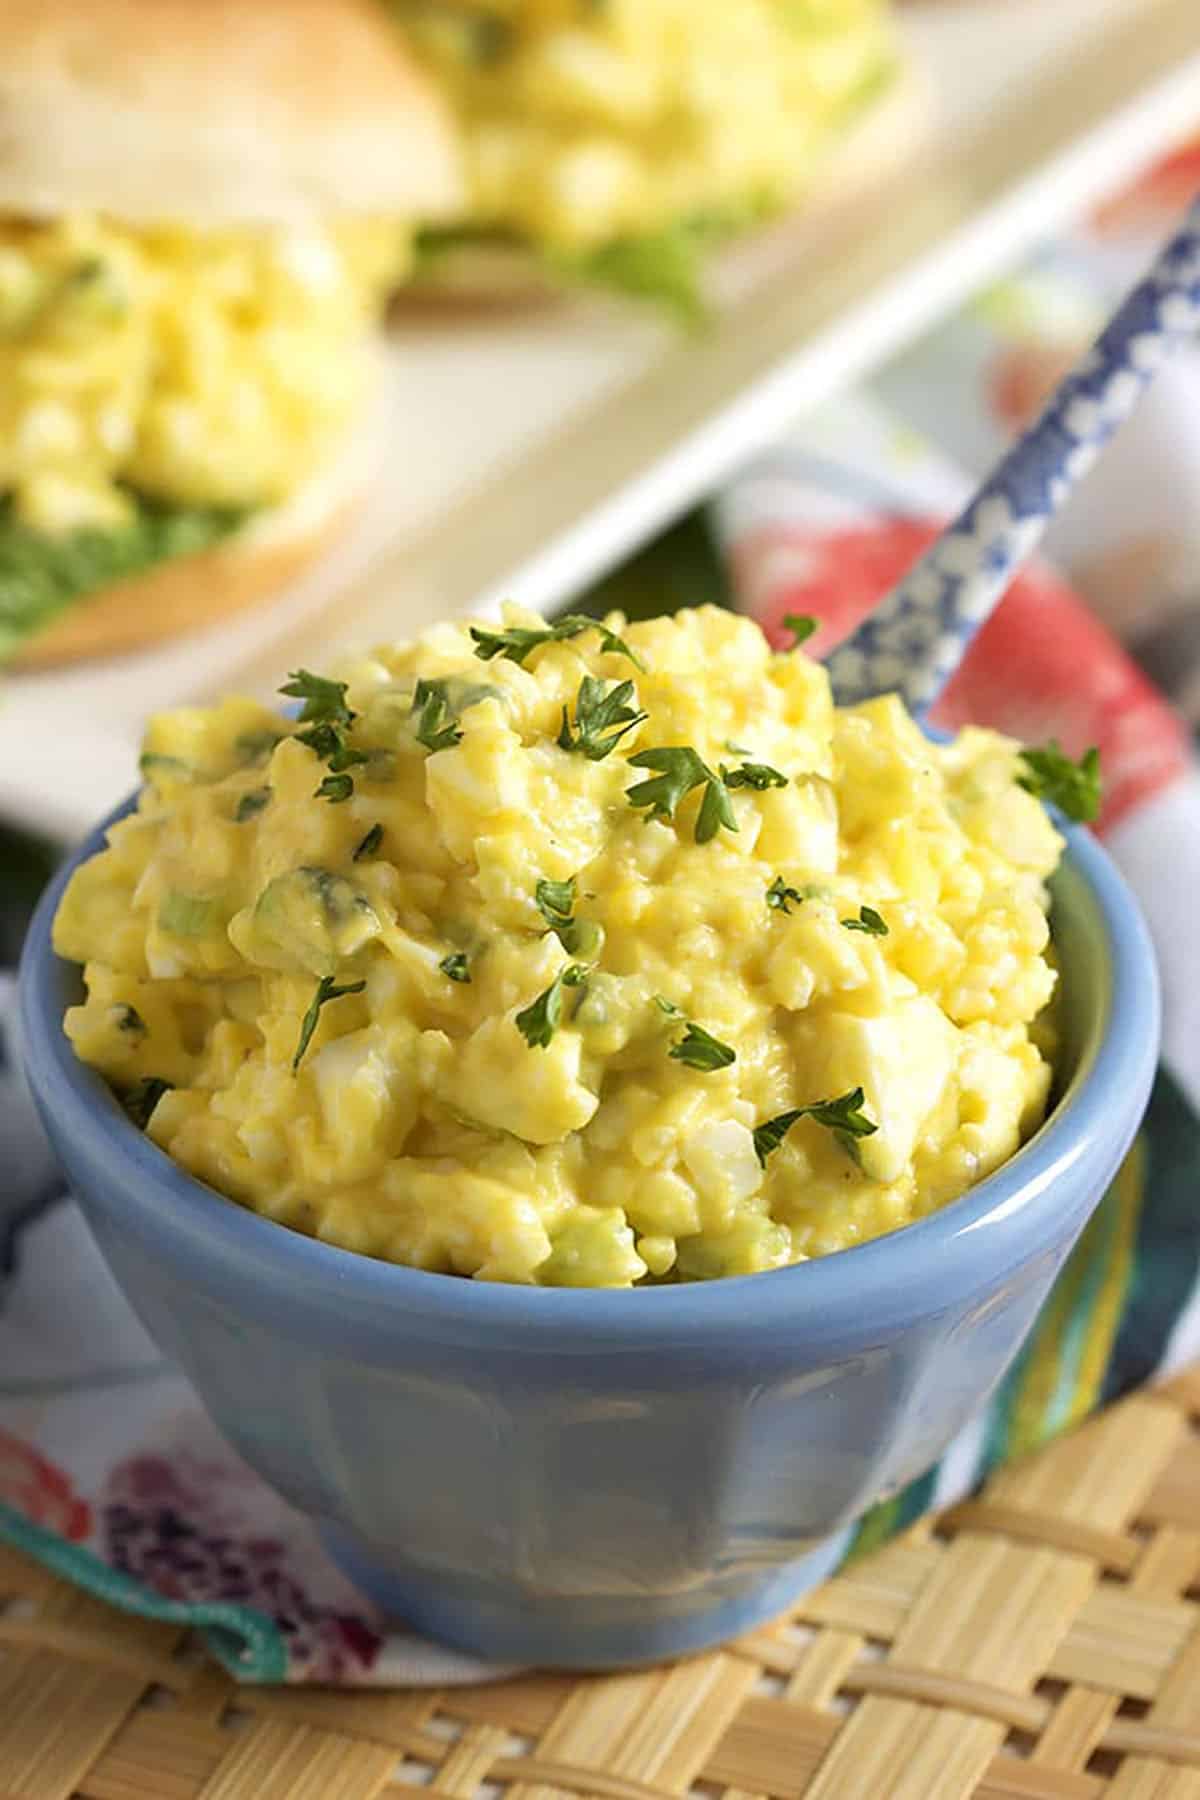 Egg salad in a small blue bowl